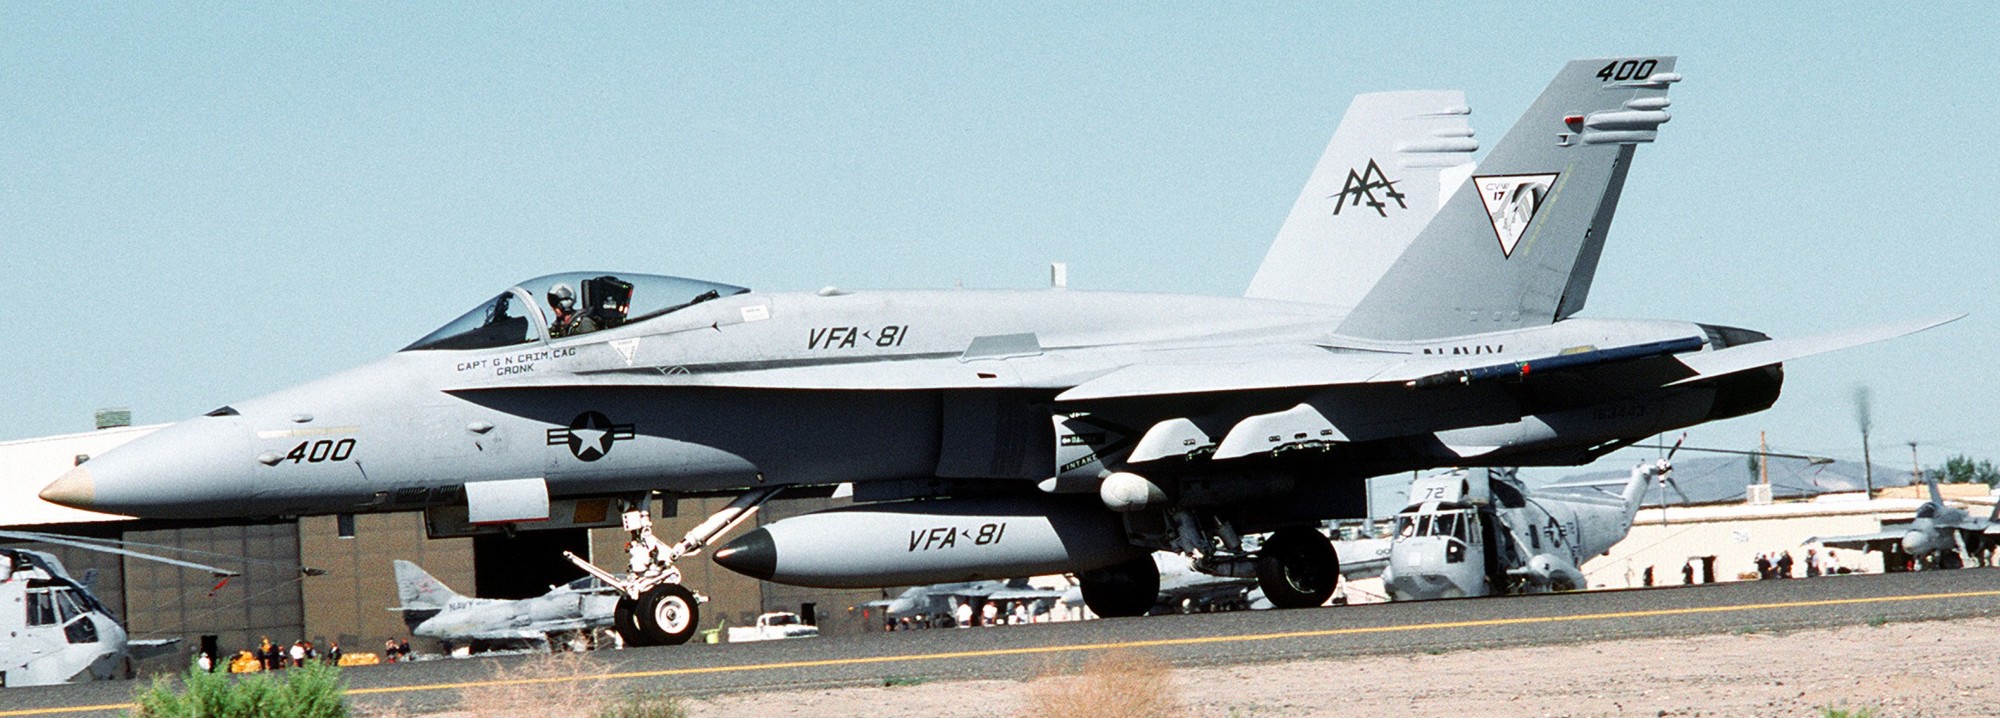 vfa-81 sunliners strike fighter squadron f/a-18c hornet cvw-17 119